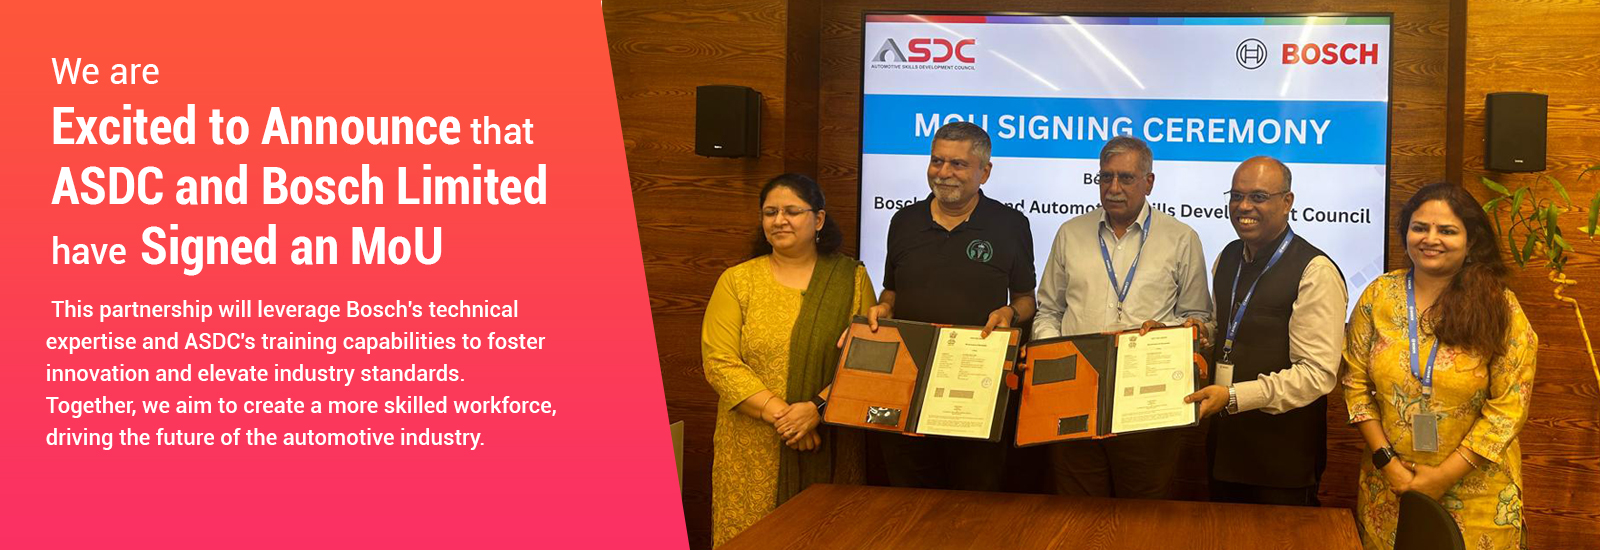 Excited To Announce that asdsc and Bosch Limited